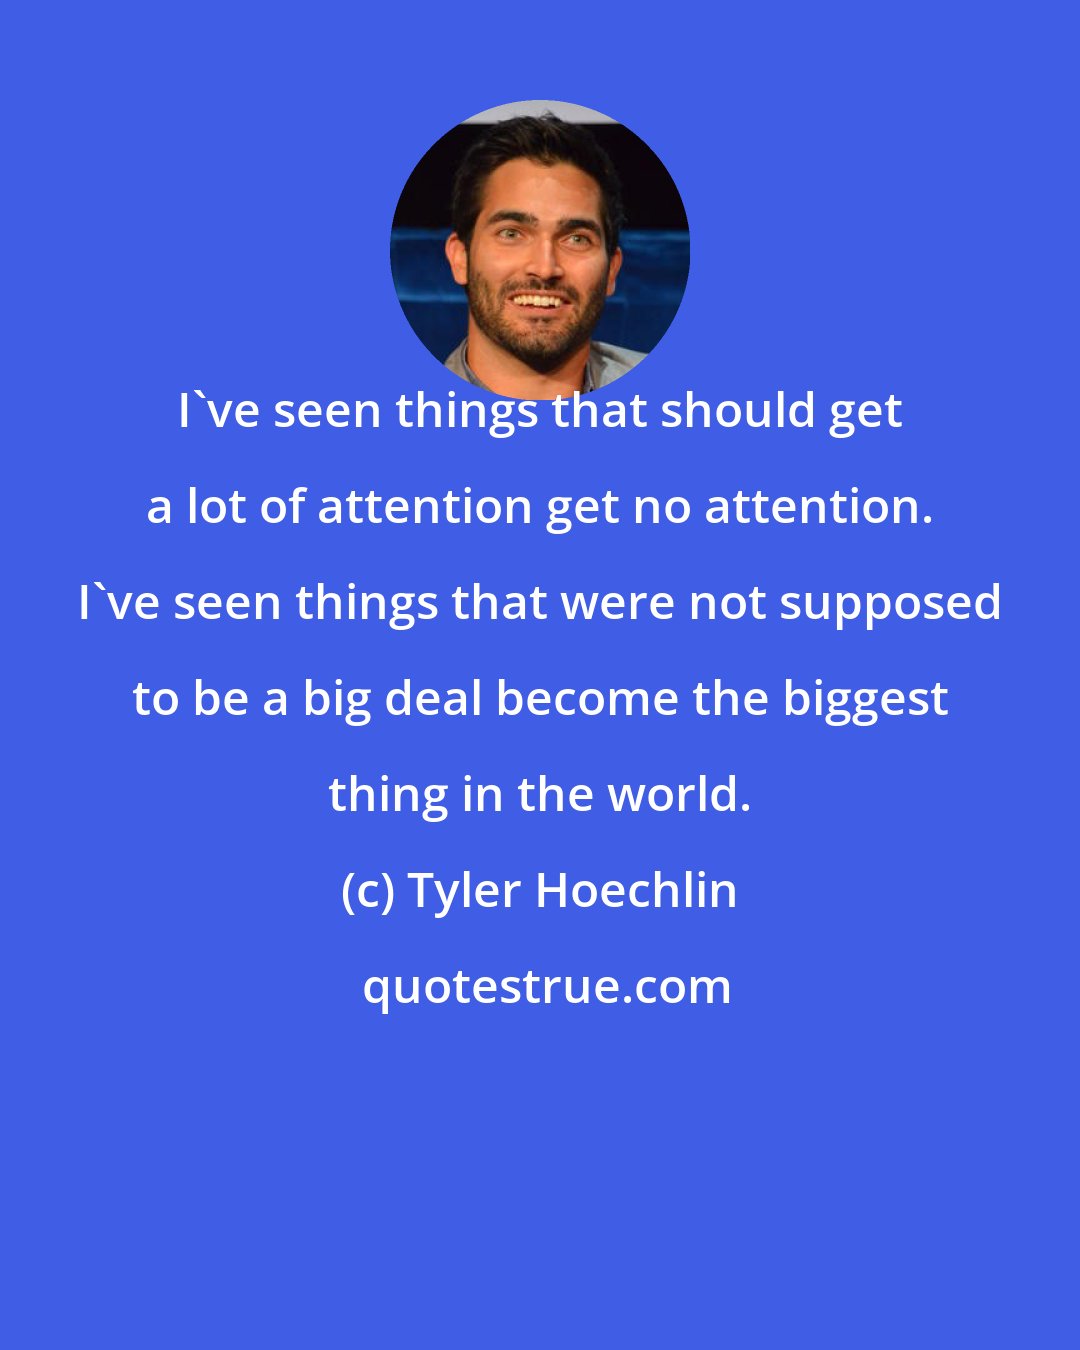 Tyler Hoechlin: I've seen things that should get a lot of attention get no attention. I've seen things that were not supposed to be a big deal become the biggest thing in the world.